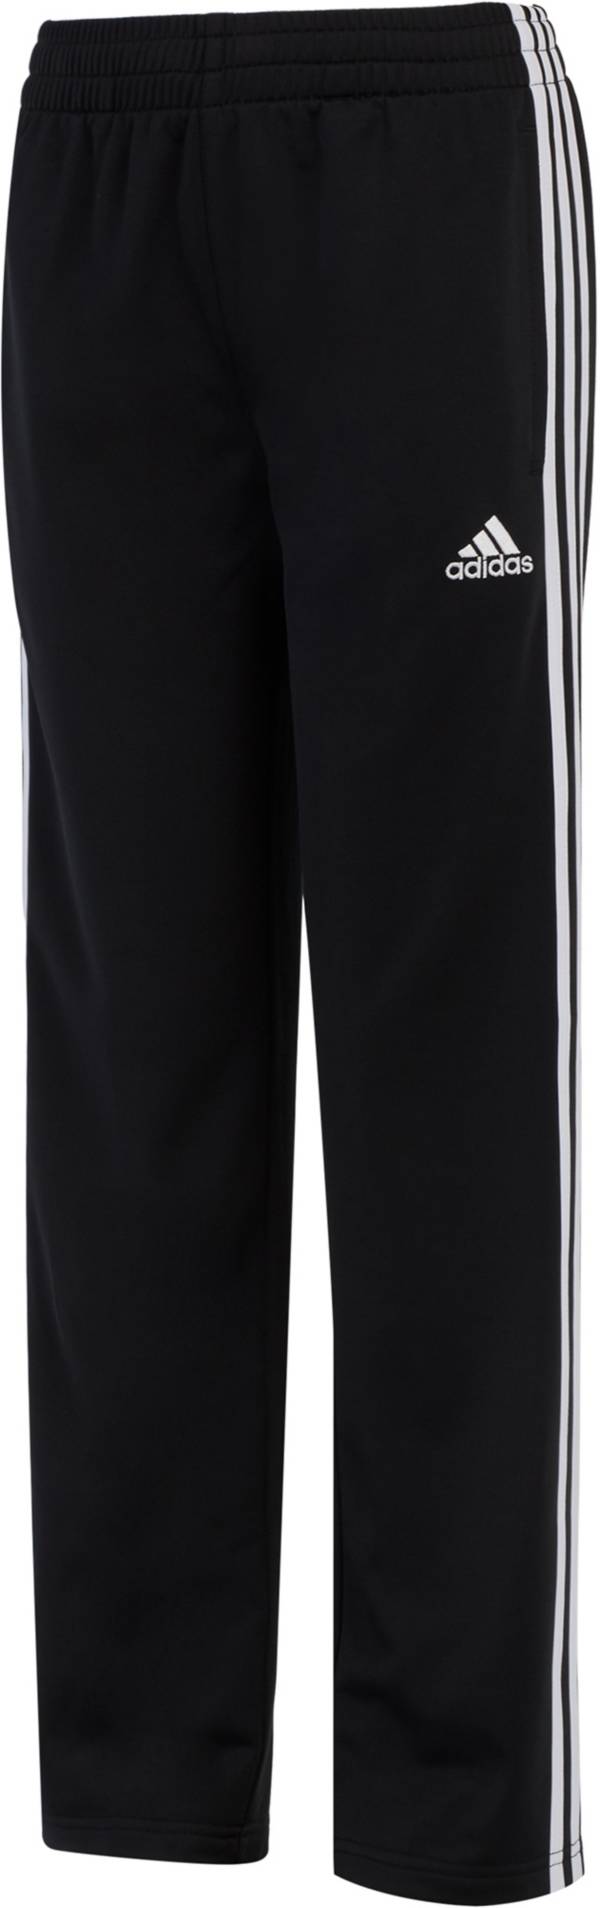 adidas Little Boys' Iconic Tricot Pants product image